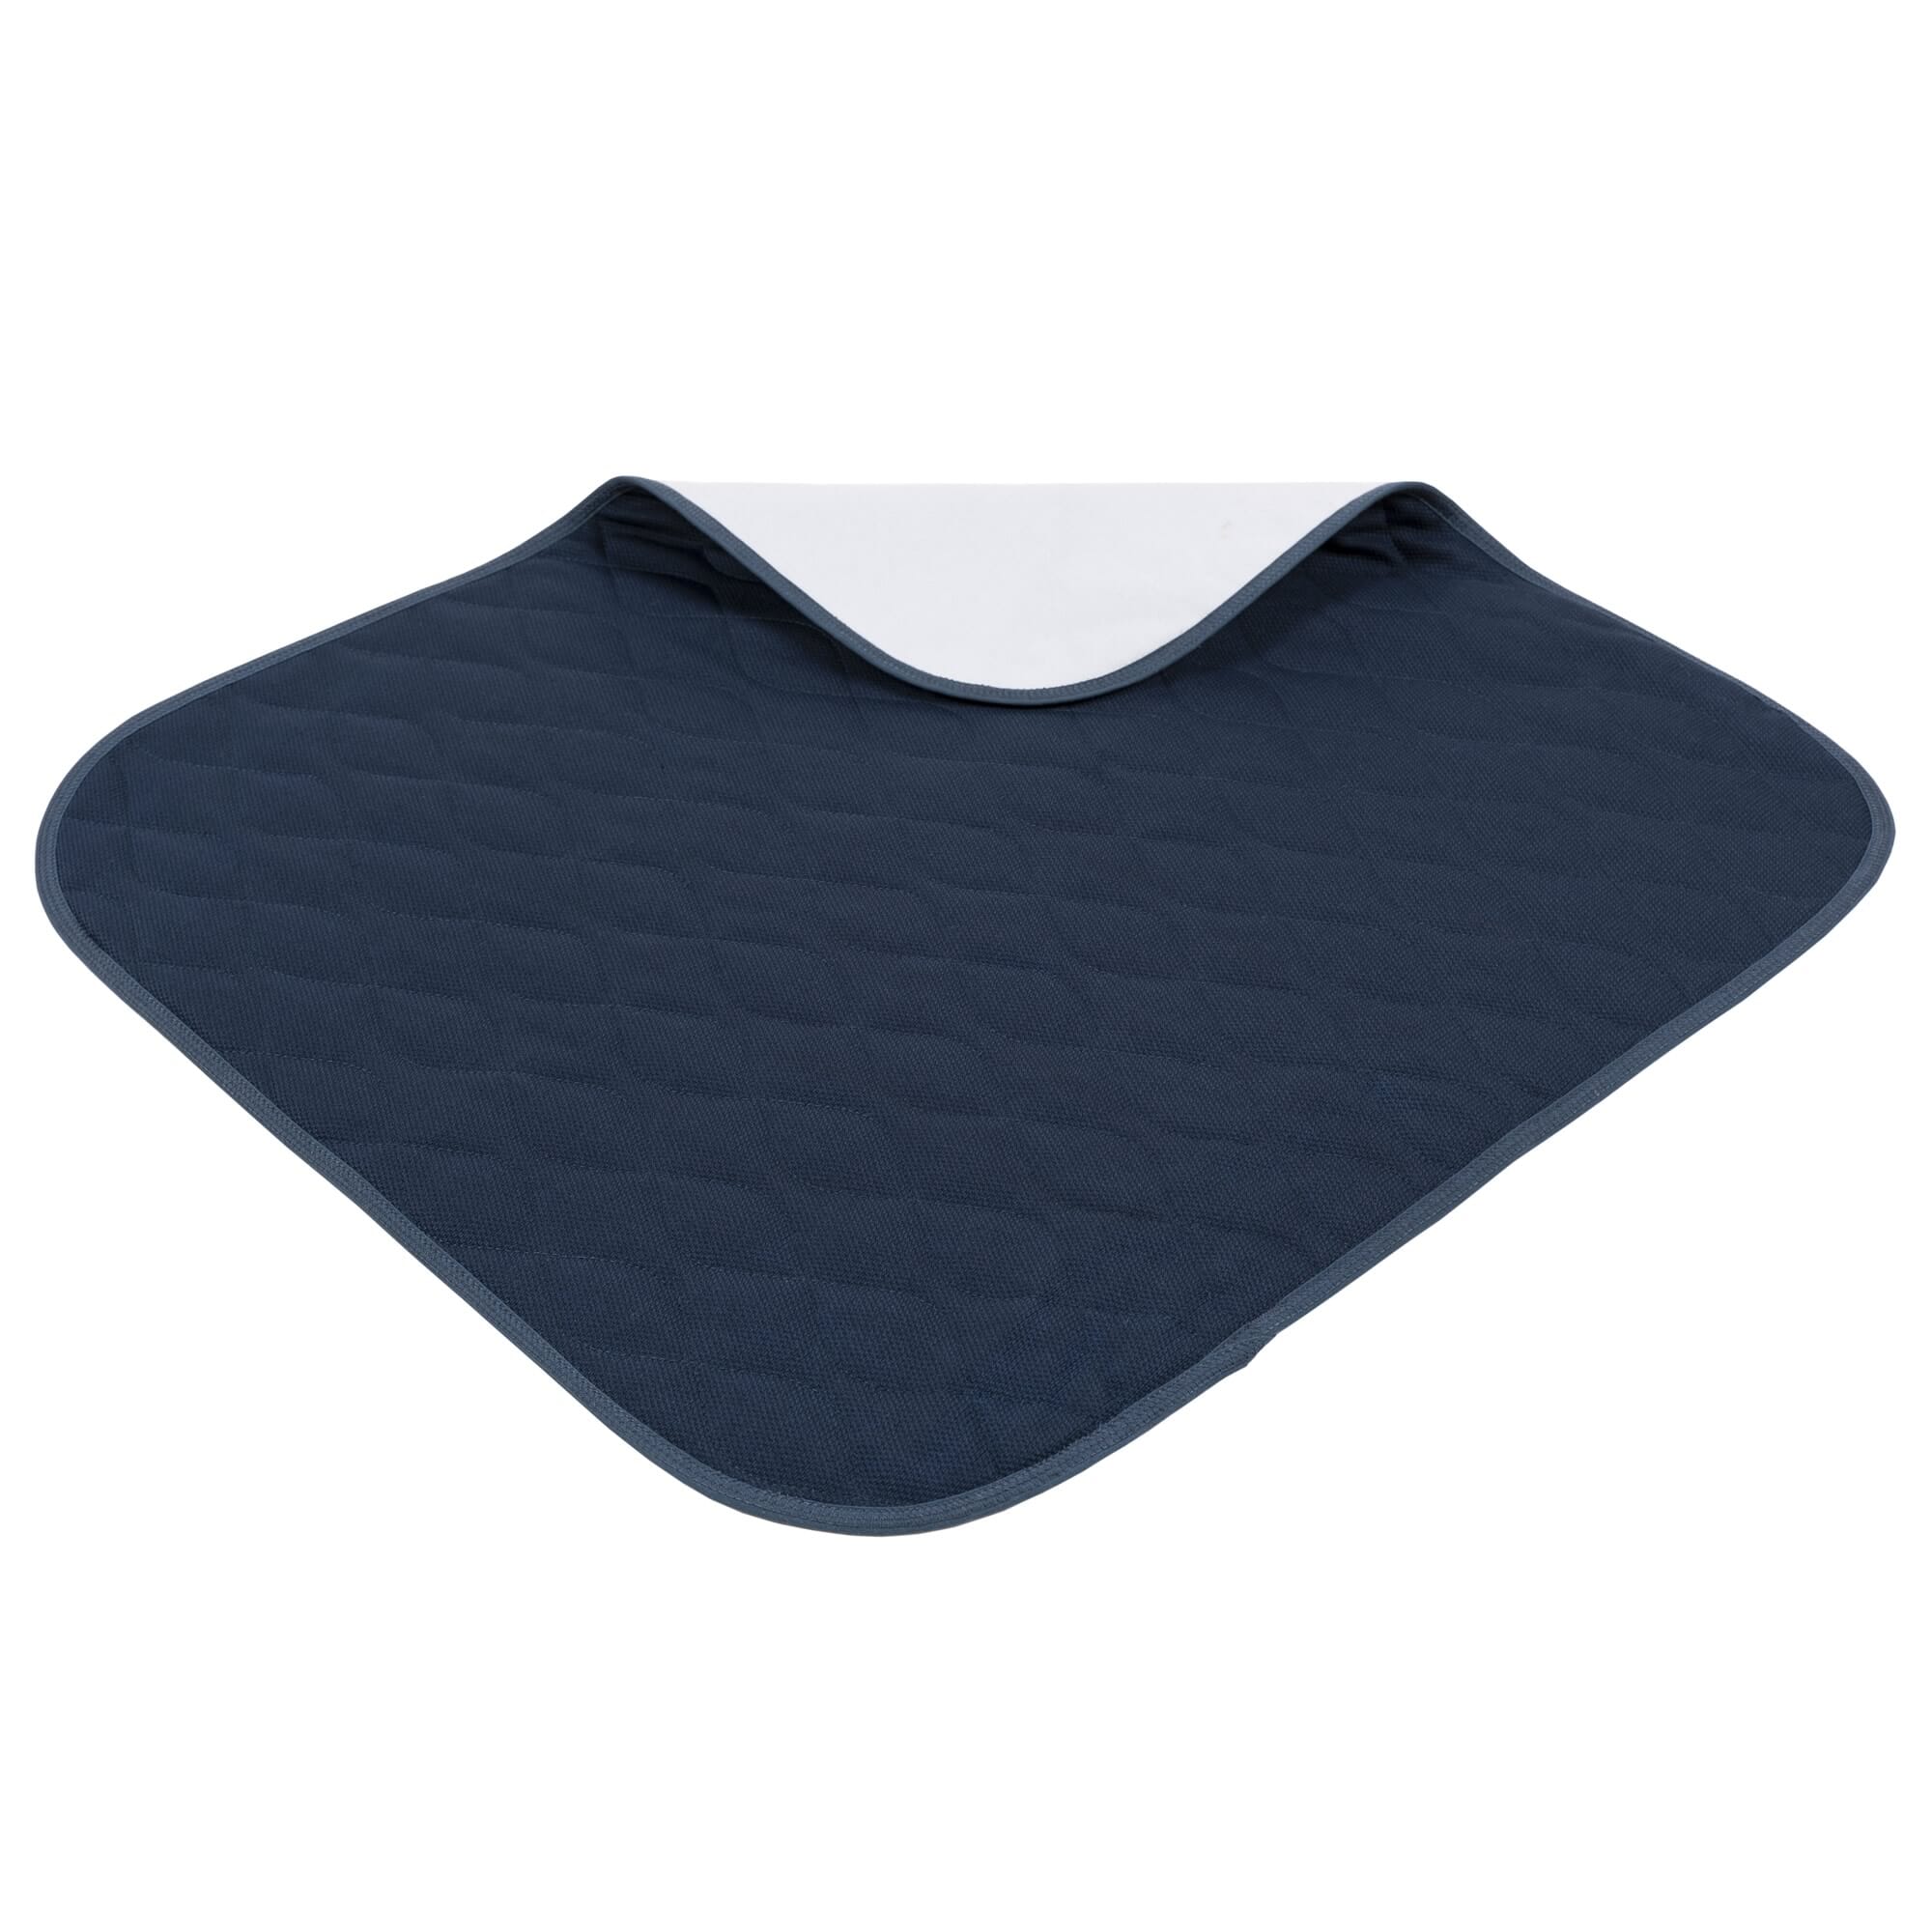 View Economy Chair Pad Blue information